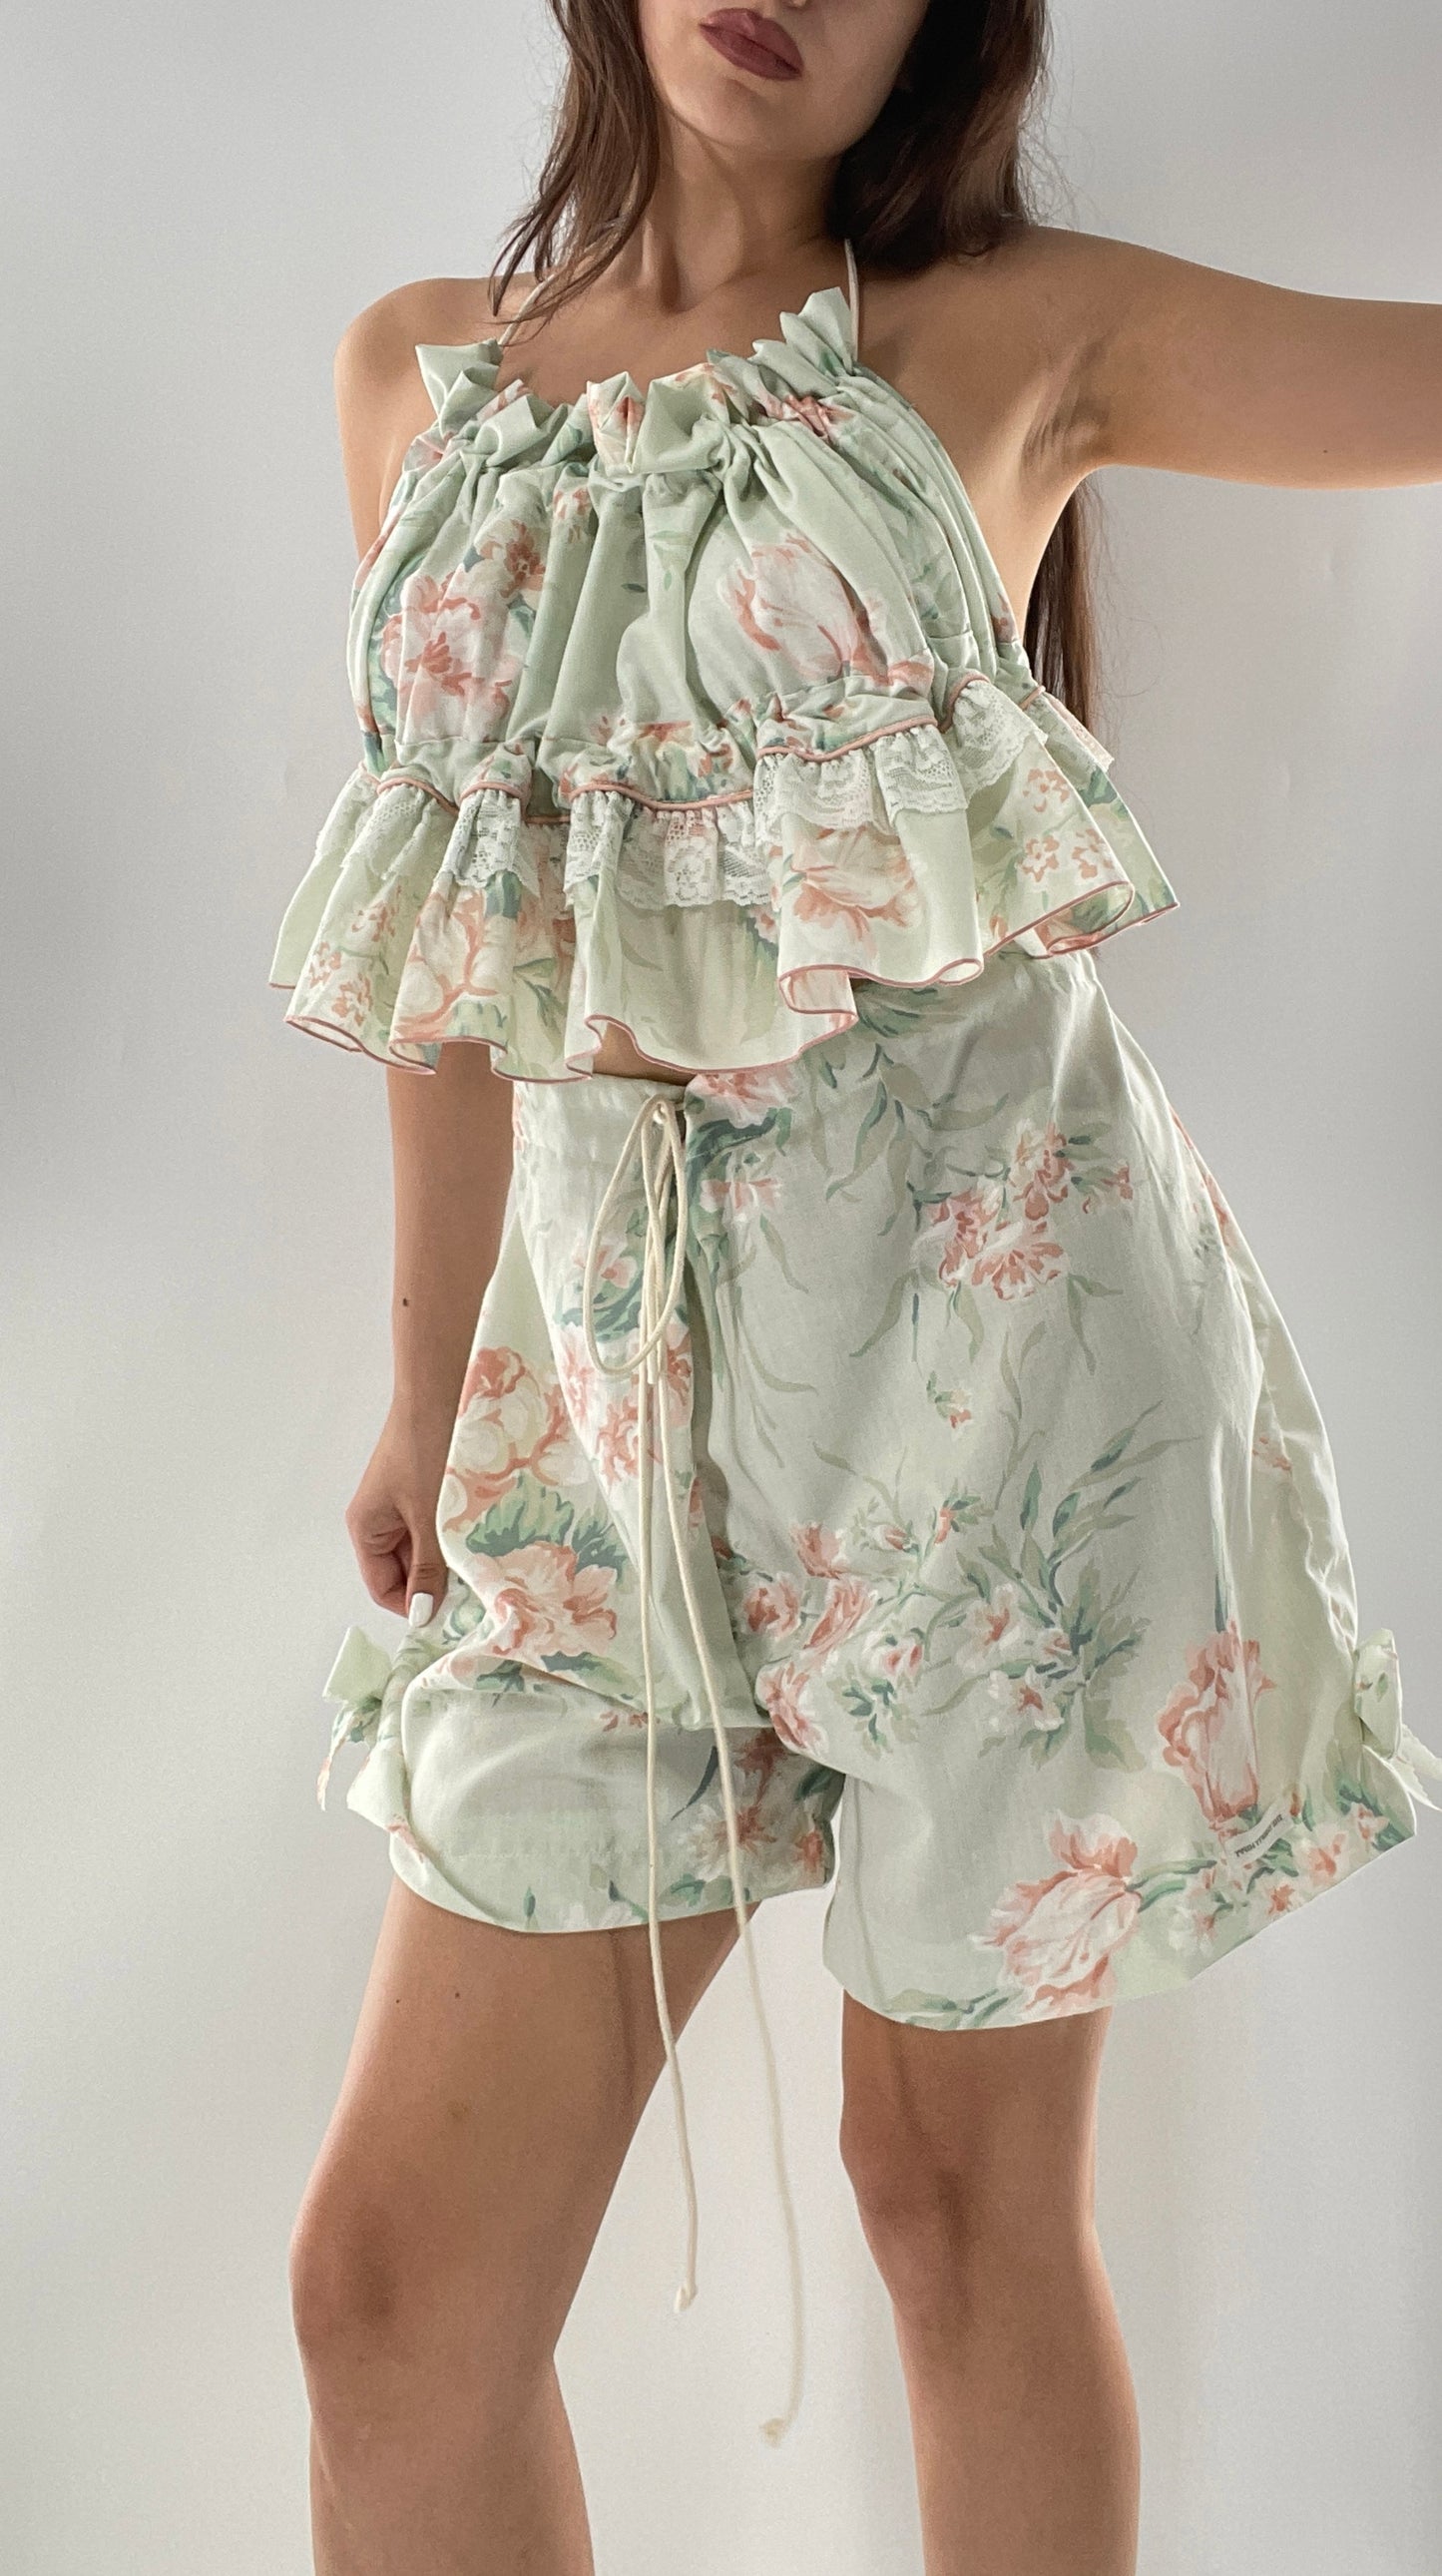 Vintage 2 Piece Bloomers and Babydoll Blouse Set Covered in Delicate Florals, Ruffles, Bows and Lace (One Size)